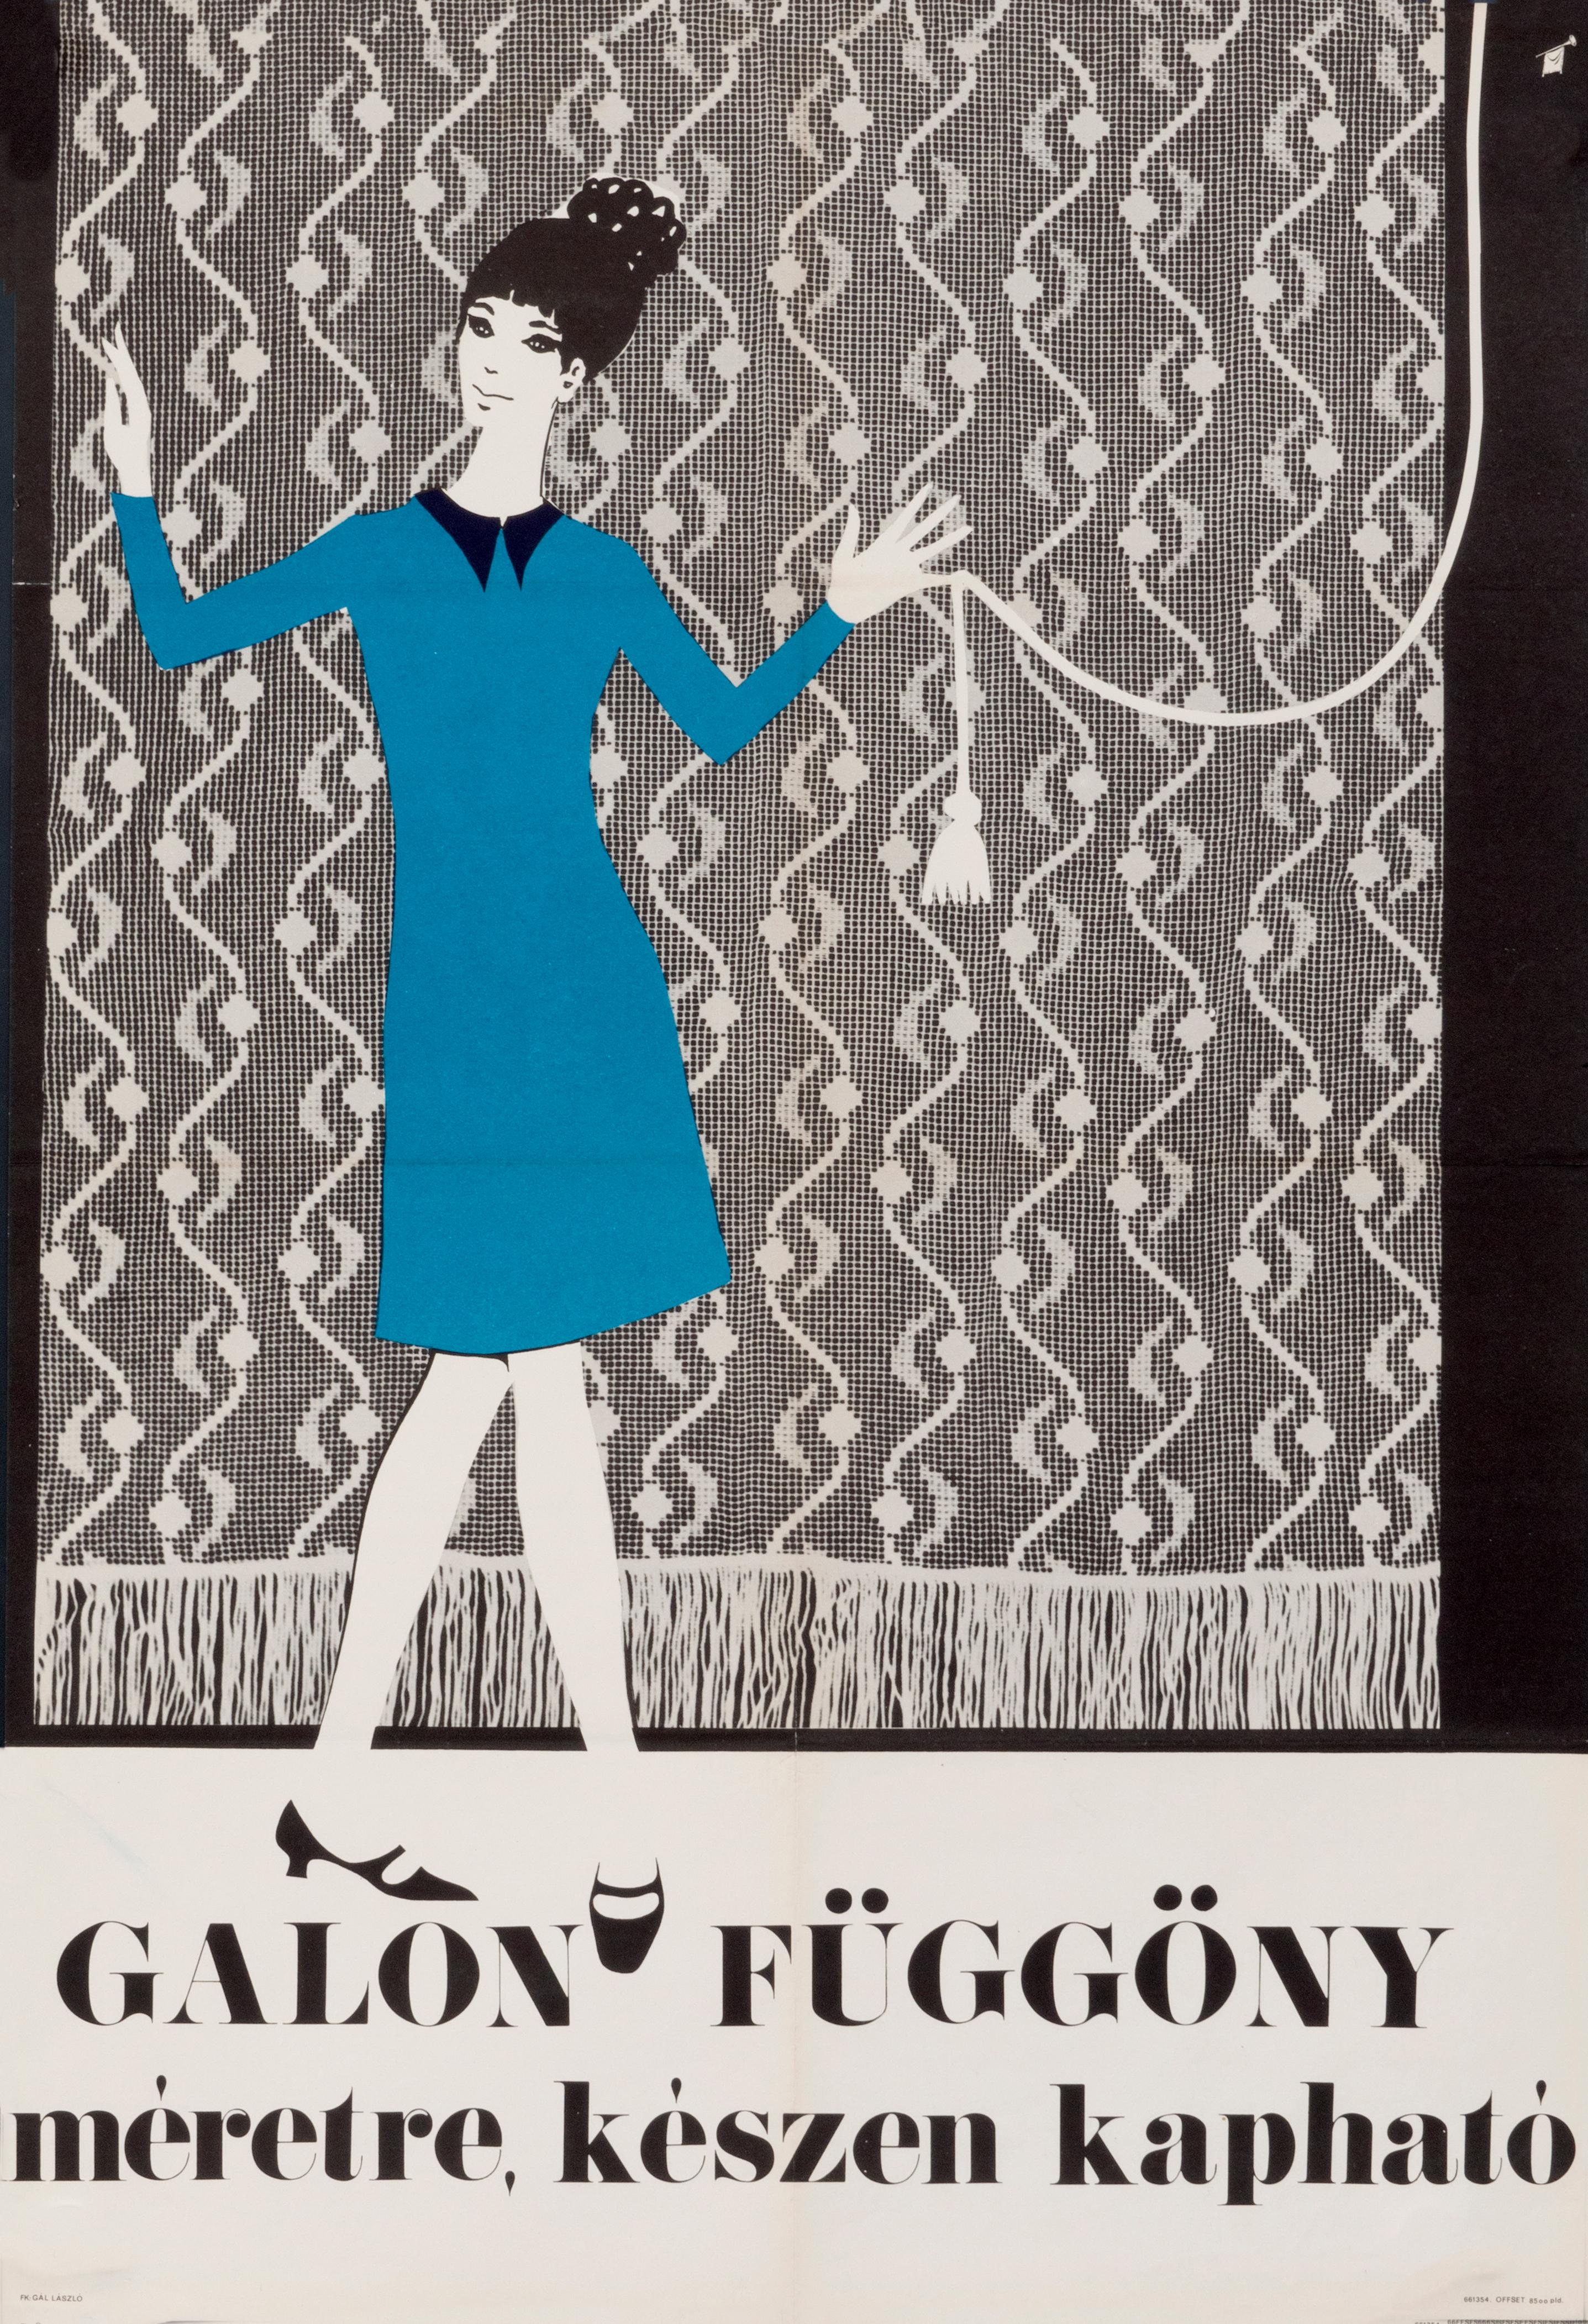 Unknown Figurative Print - Galon Curtains - Original Mid-Century Hungarian 1960s Poster for Textiles